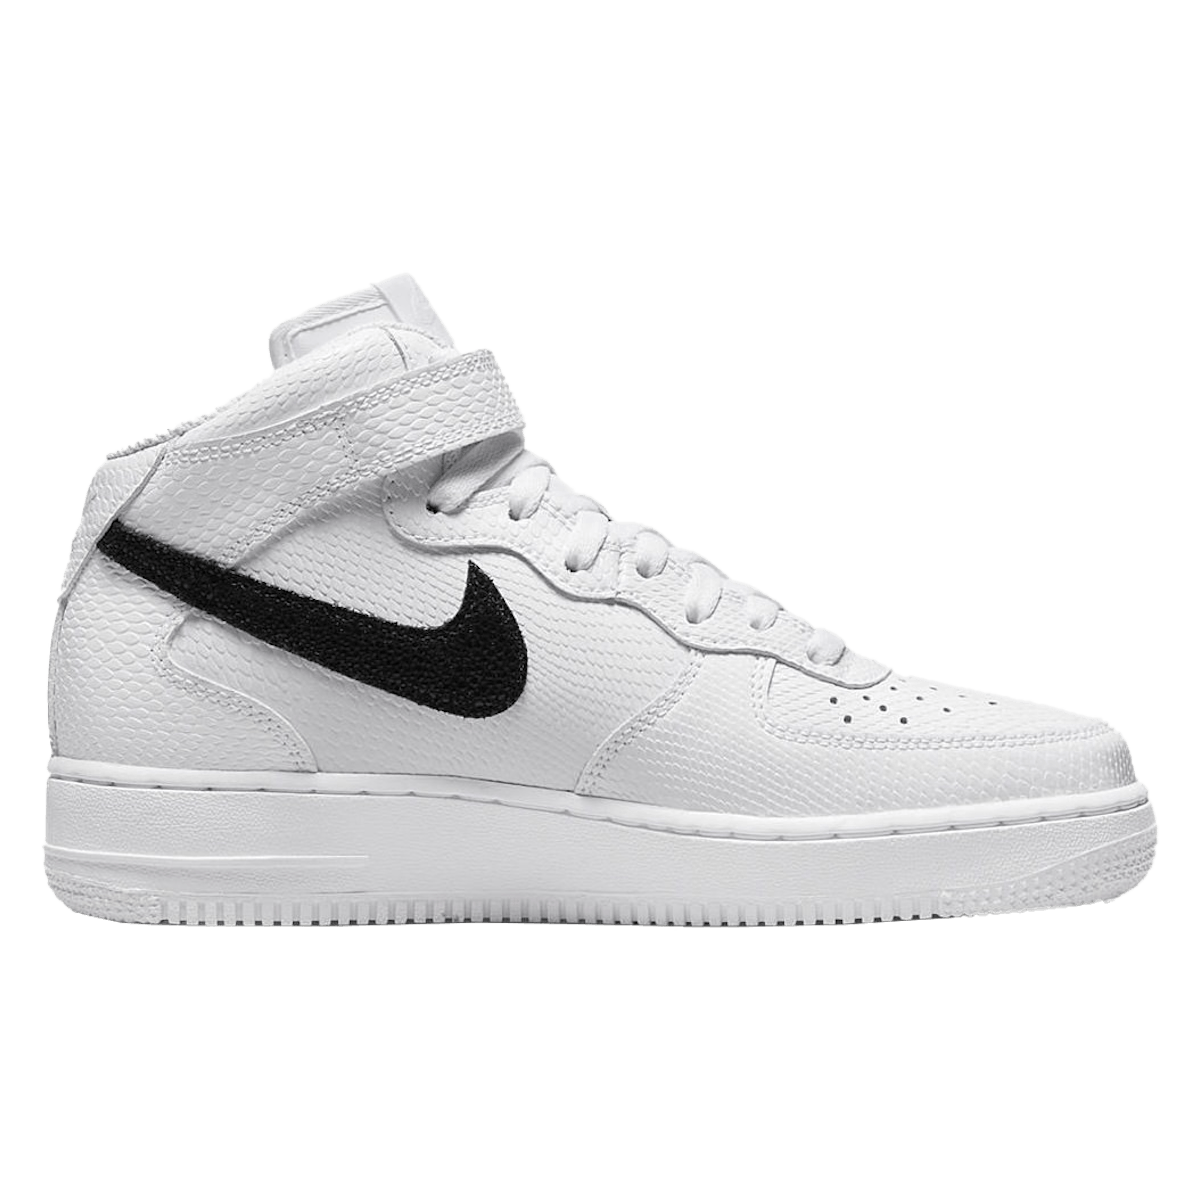 Nike Air Force 1 Mid "White Reptile"